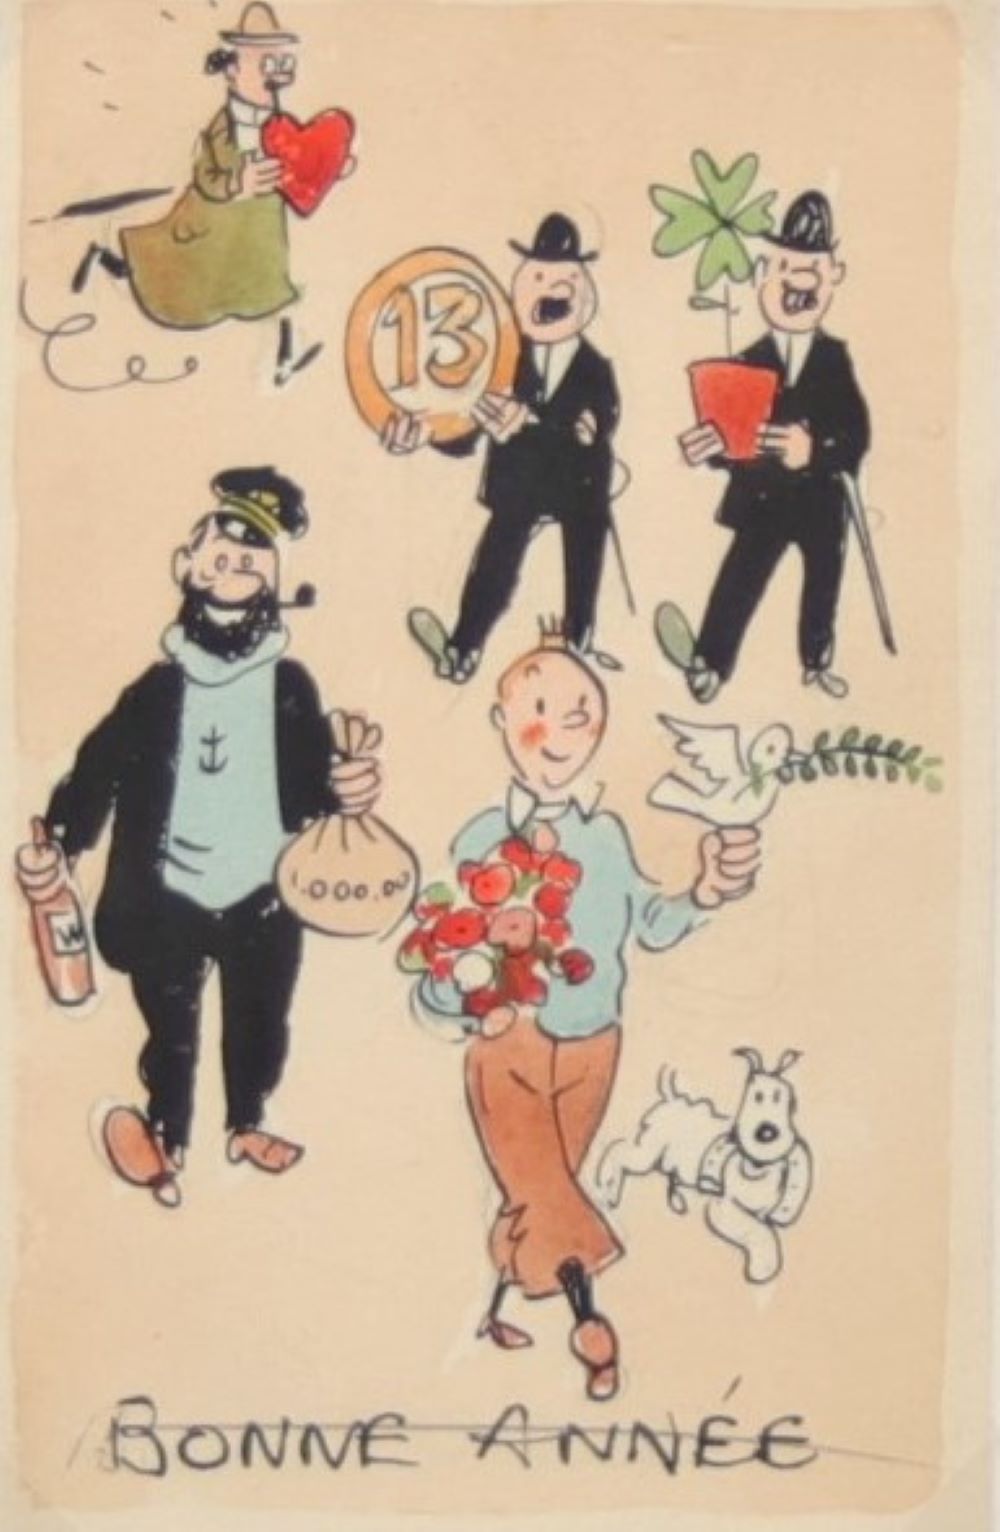 HERGE (Georges REMI dit) 1907-1983, postcard project, India ink, watercolor and pencil on paper - Bild 3 aus 5